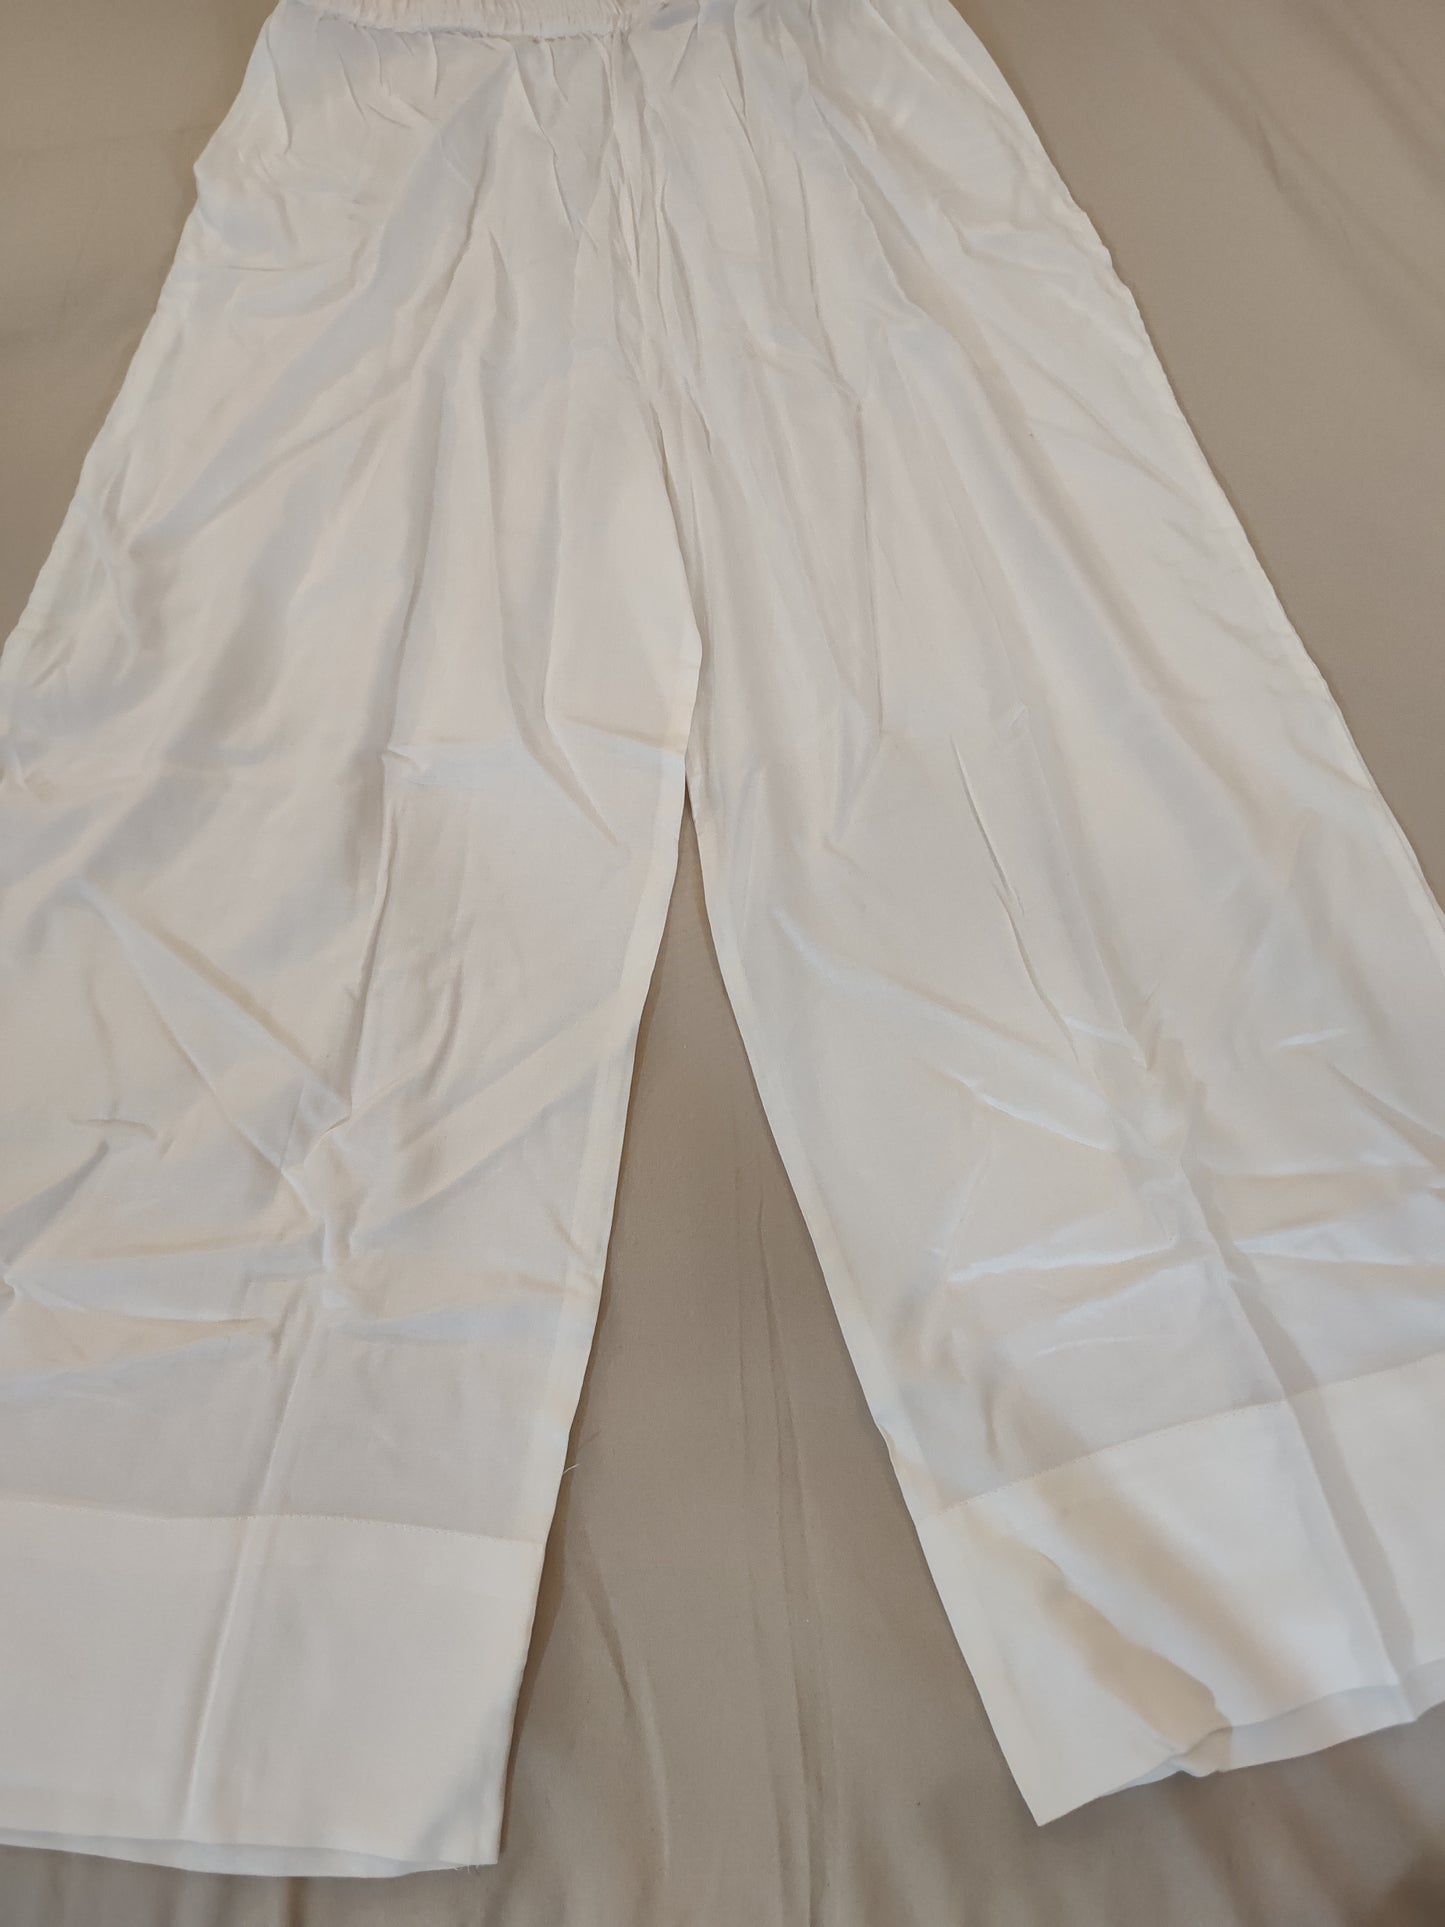 Appealing Plain Cotton White Palazzo Pants For Women In USA